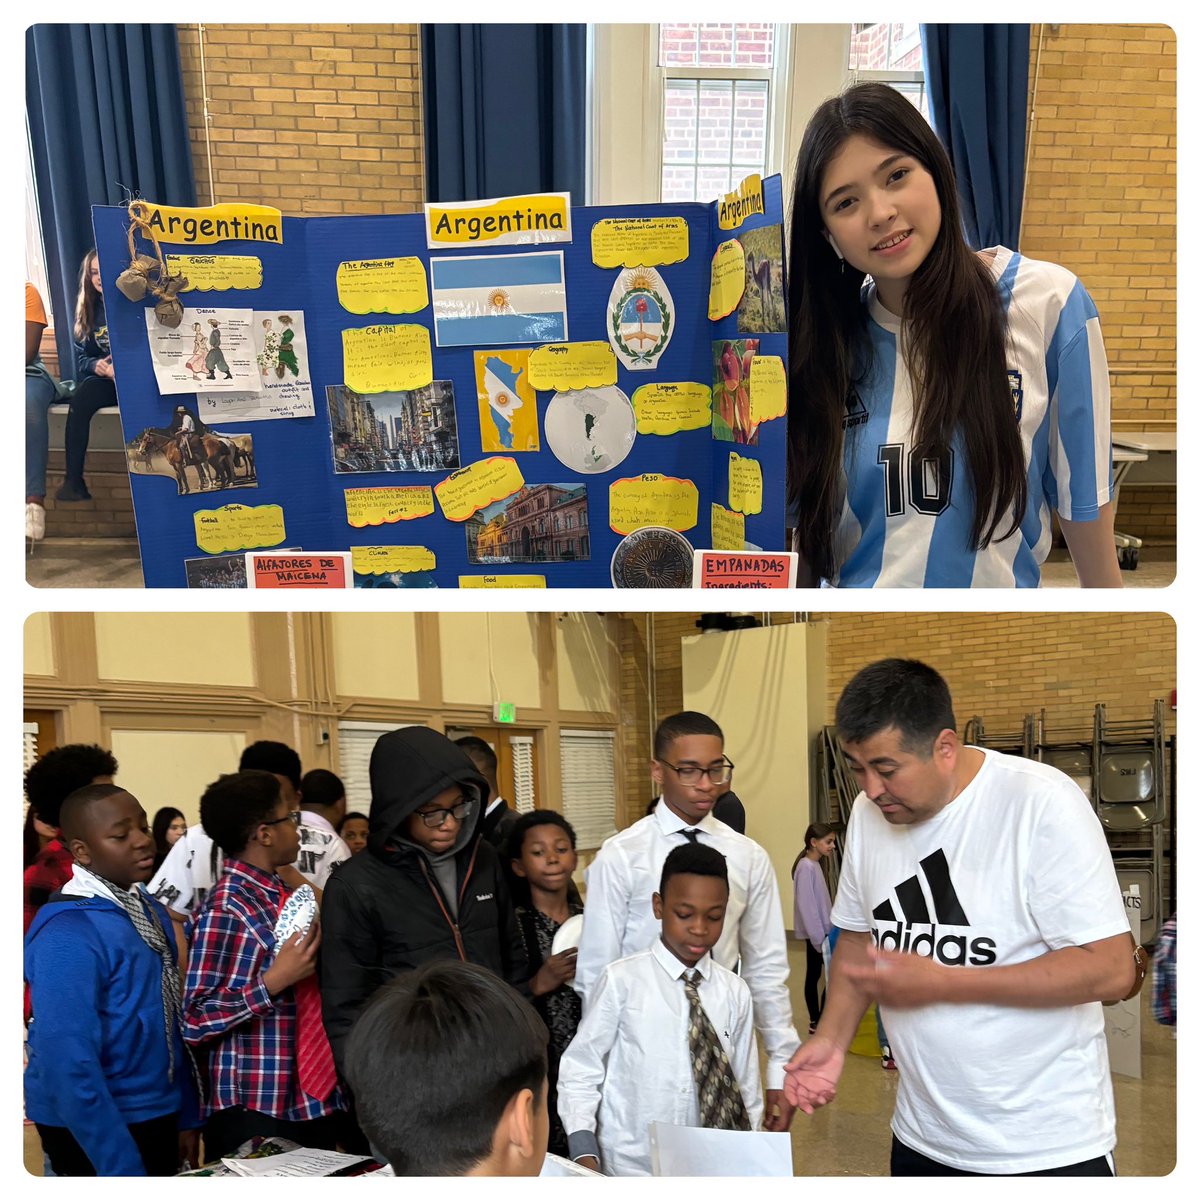 This evening the Student Council @fms_bcps held their first Culture Fair and it was an incredible success! Ss shared food, clothing, artifacts, and more from their unique cultures! Special thanks to Black Boy Joy and Genius members for visiting! @SchifferB @Fschrader1